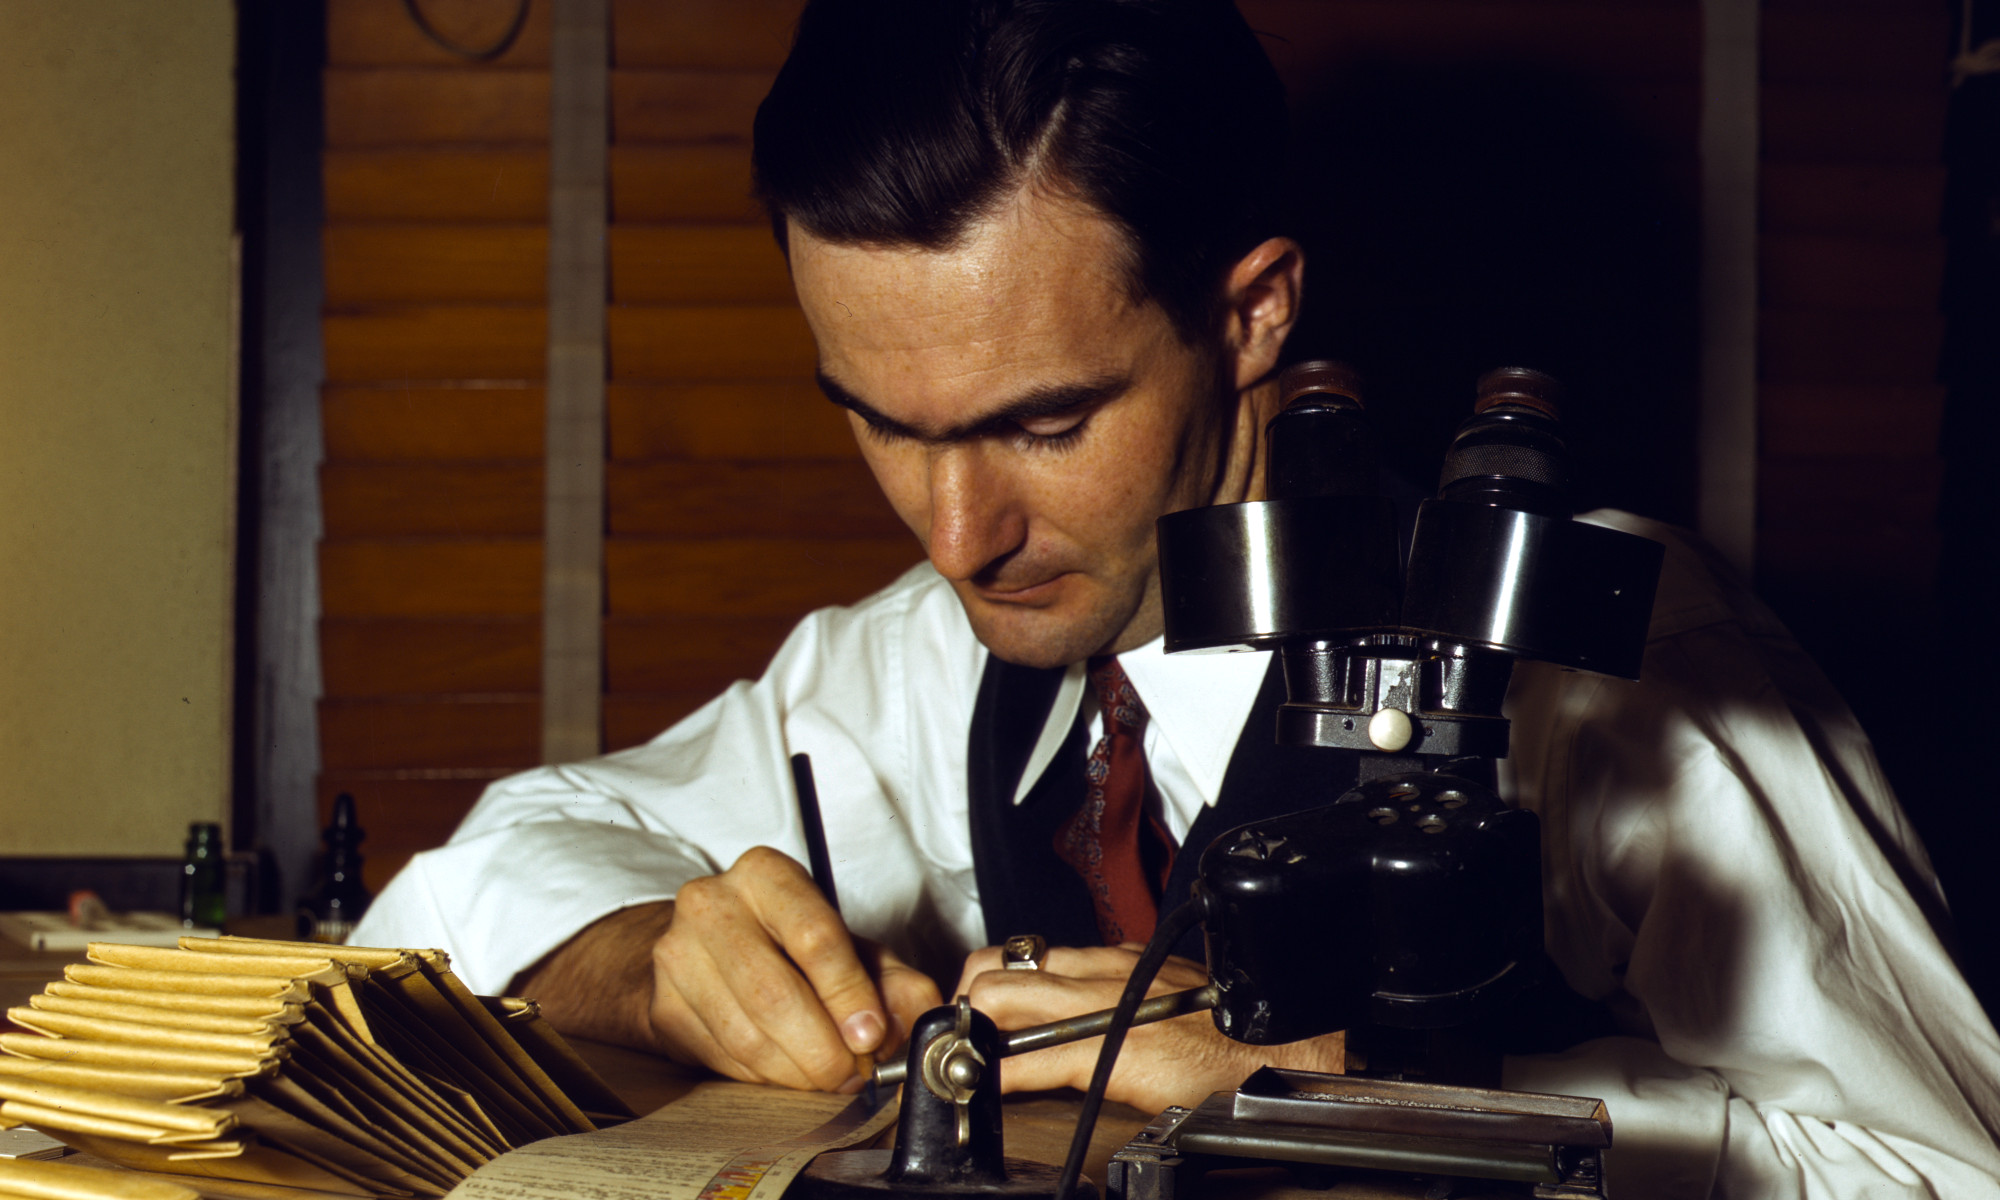 Photograph from the forties of scientist with microscope